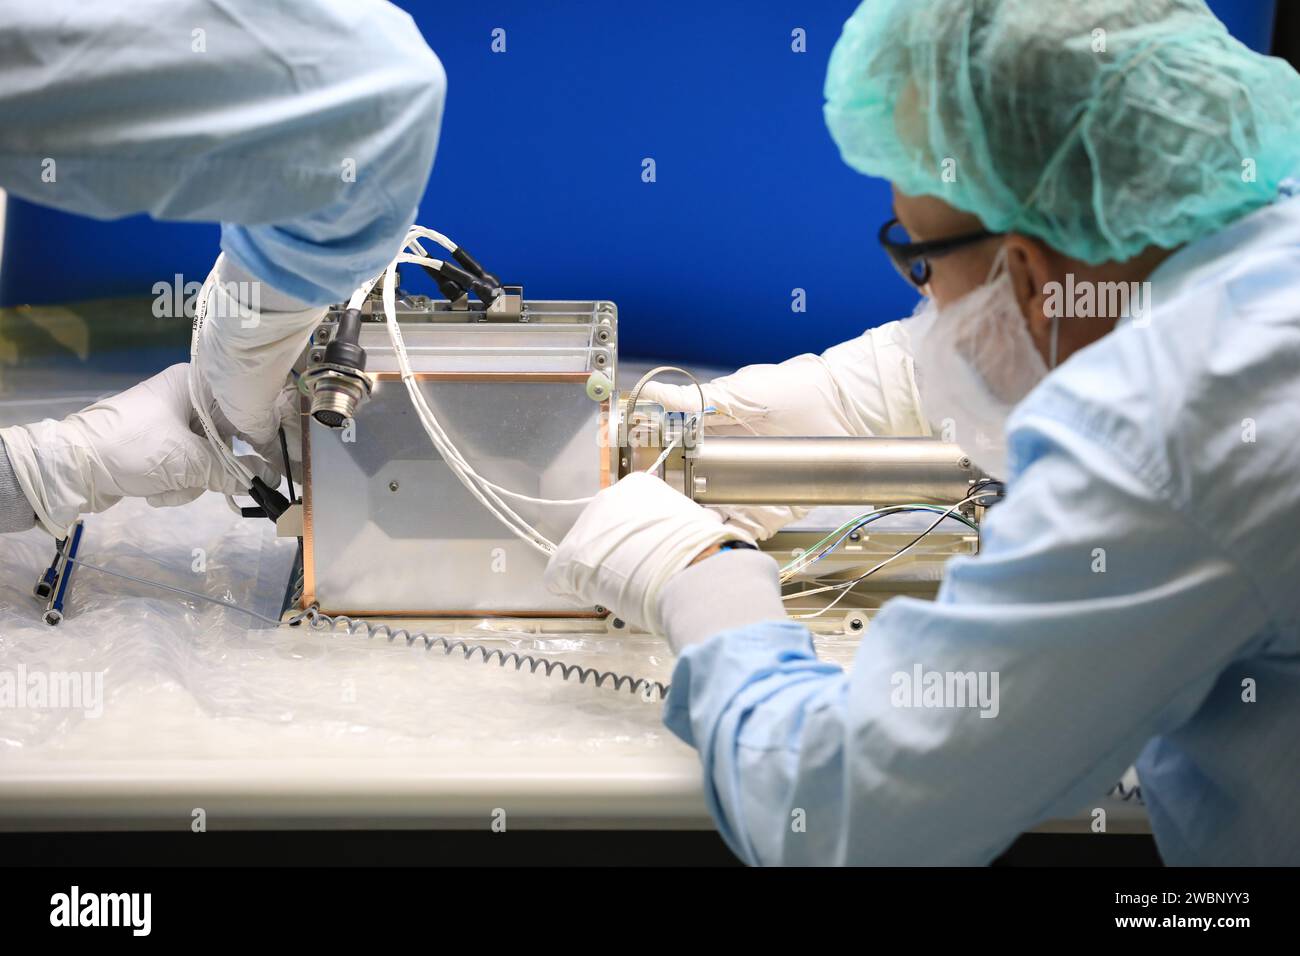 Engineers and technicians at NASA’s Kennedy Space Center in Florida install the radiator for the Mass Spectrometer Observing Lunar Operations (MSolo) instrument inside the Space Station Processing Facility on Sept. 25, 2020. MSolo will help analyze the chemical makeup of landing sites on the Moon, as well as study water on the lunar surface. The radiator will help keep the instrument’s temperature stable in the extreme heat and cold it will encounter. MSolo instruments are scheduled to launch on multiple robotic missions as part of NASA’s Commercial Lunar Payload Services (CLPS), with the firs Stock Photo